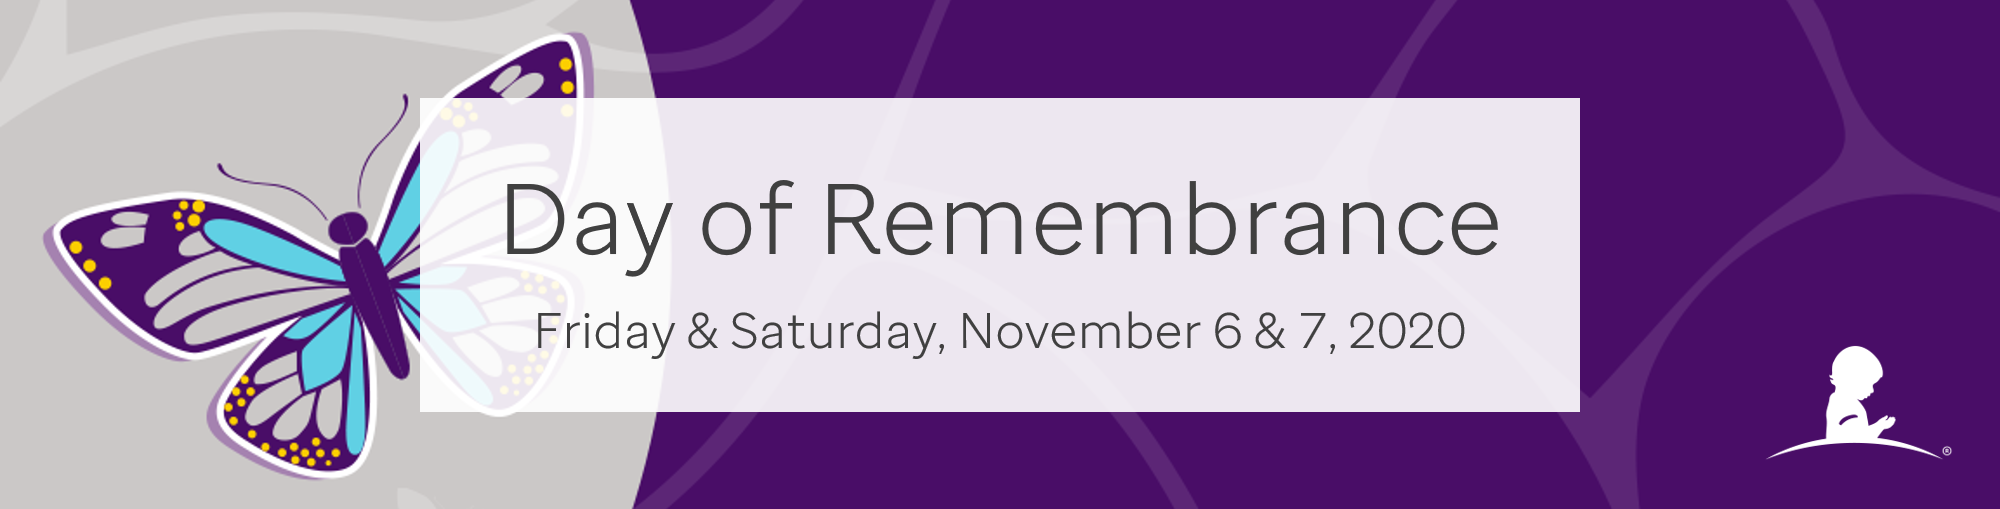 Day of Remembrance 2020